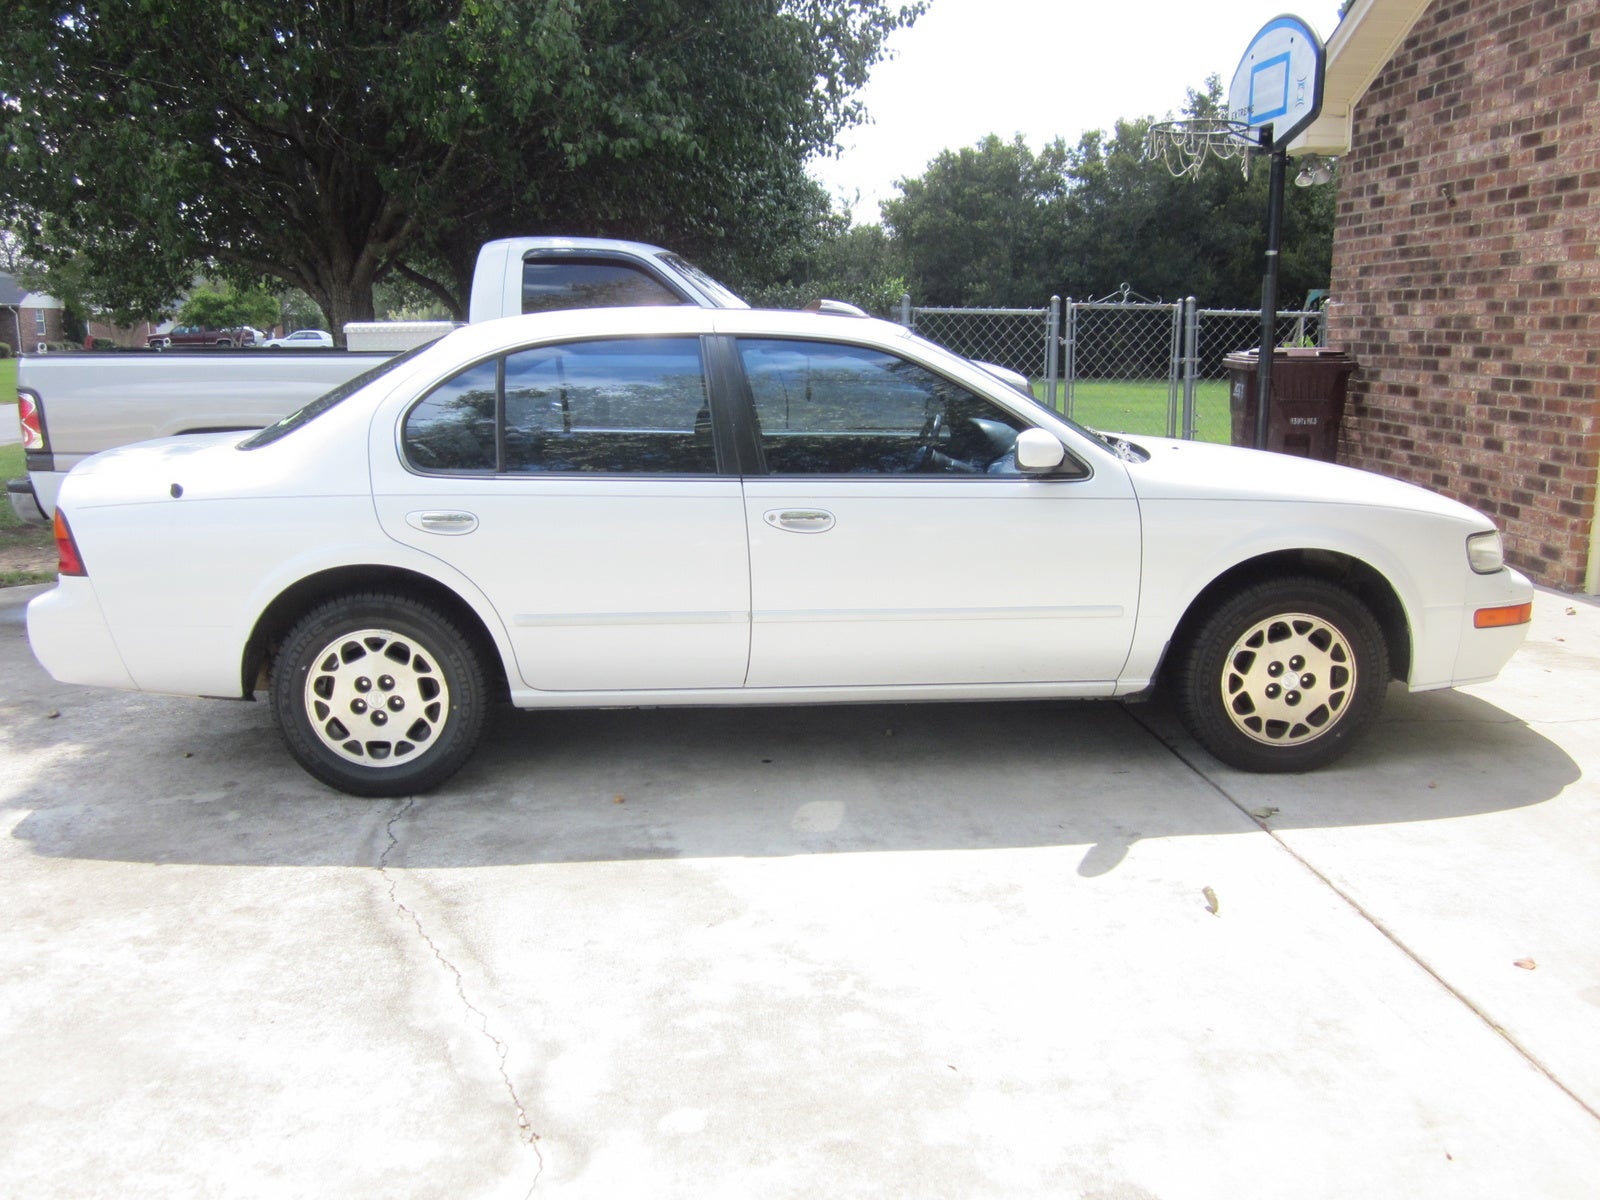 Picture of the 1996 nissan maxima #2